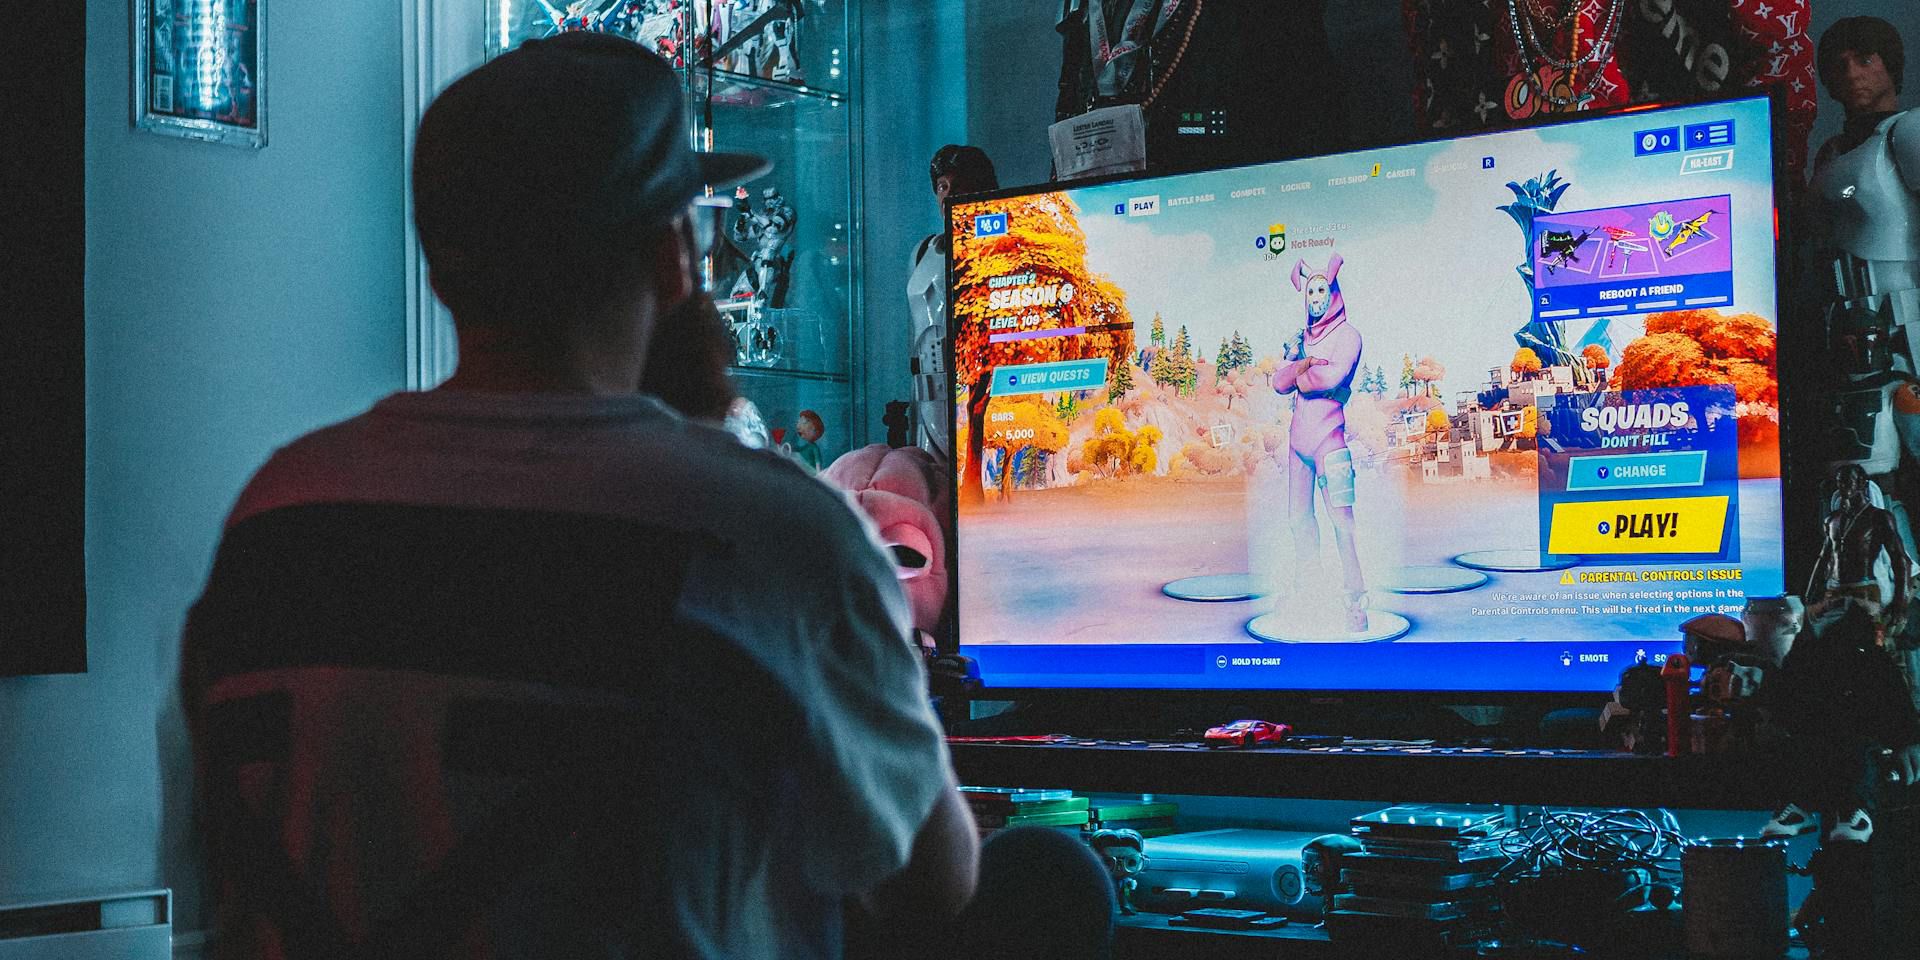 Gaming on a TV